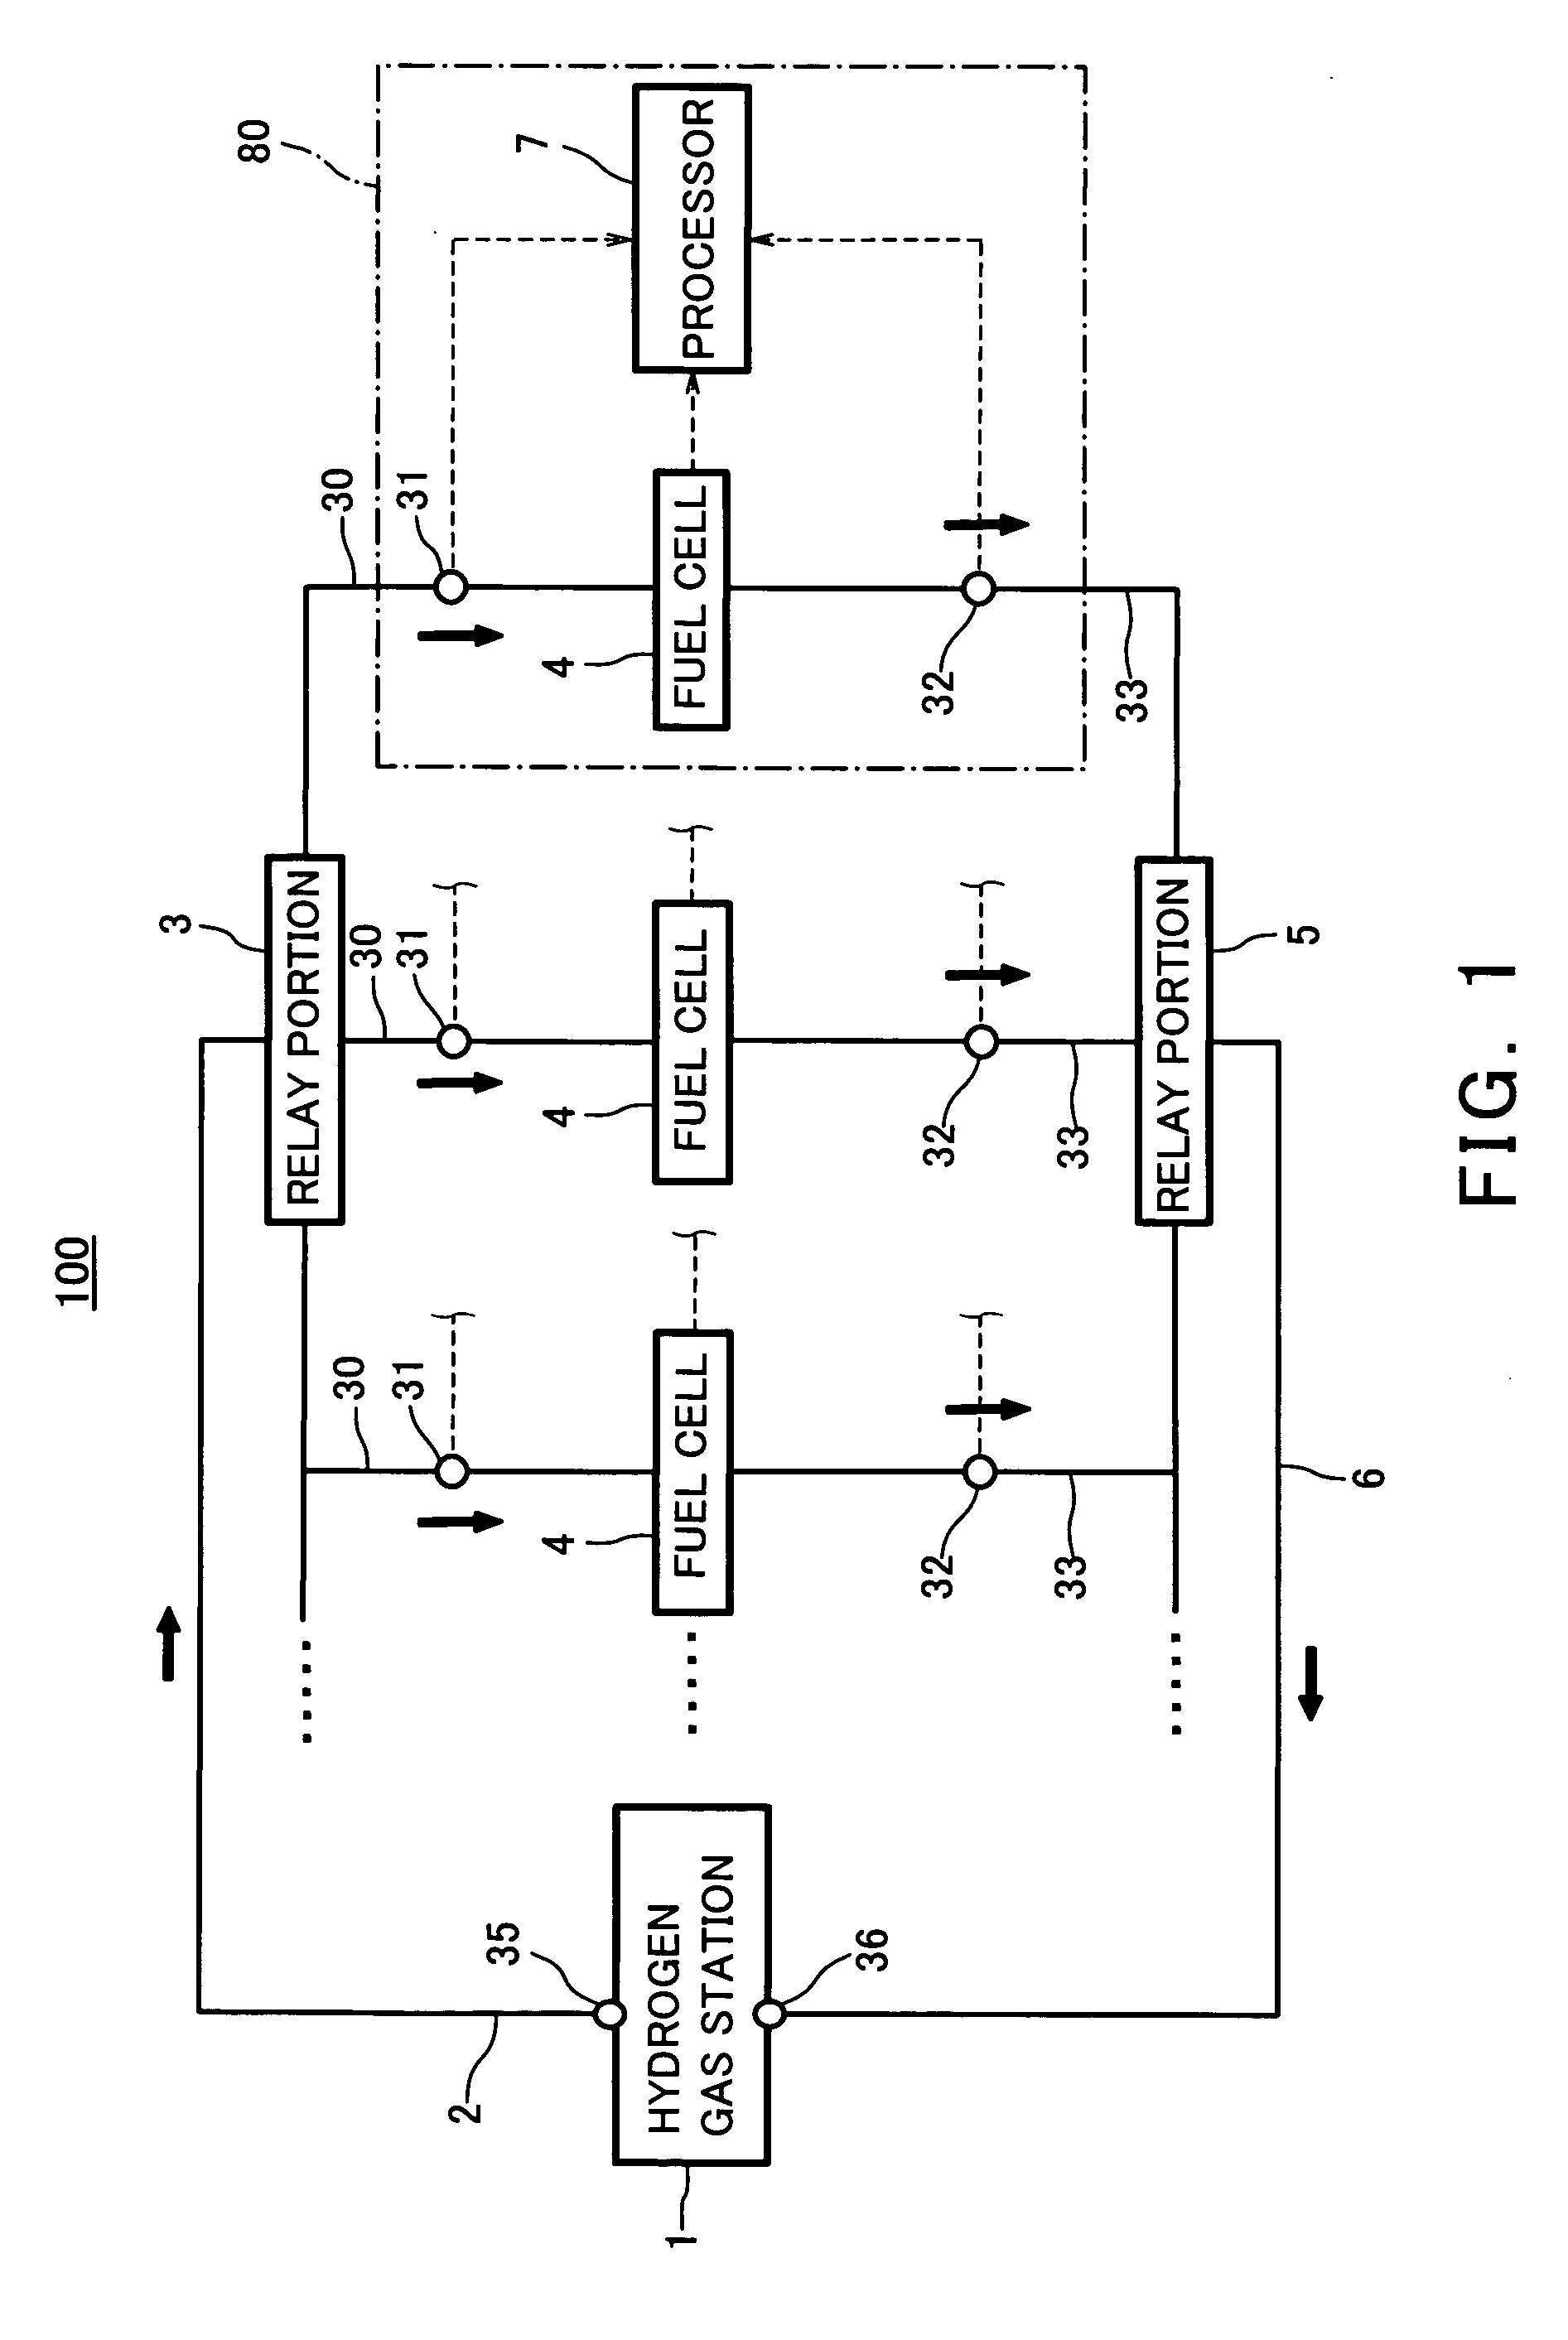 Hydrogen gas station, fuel cell system, and hydrogen gas rate accounting device